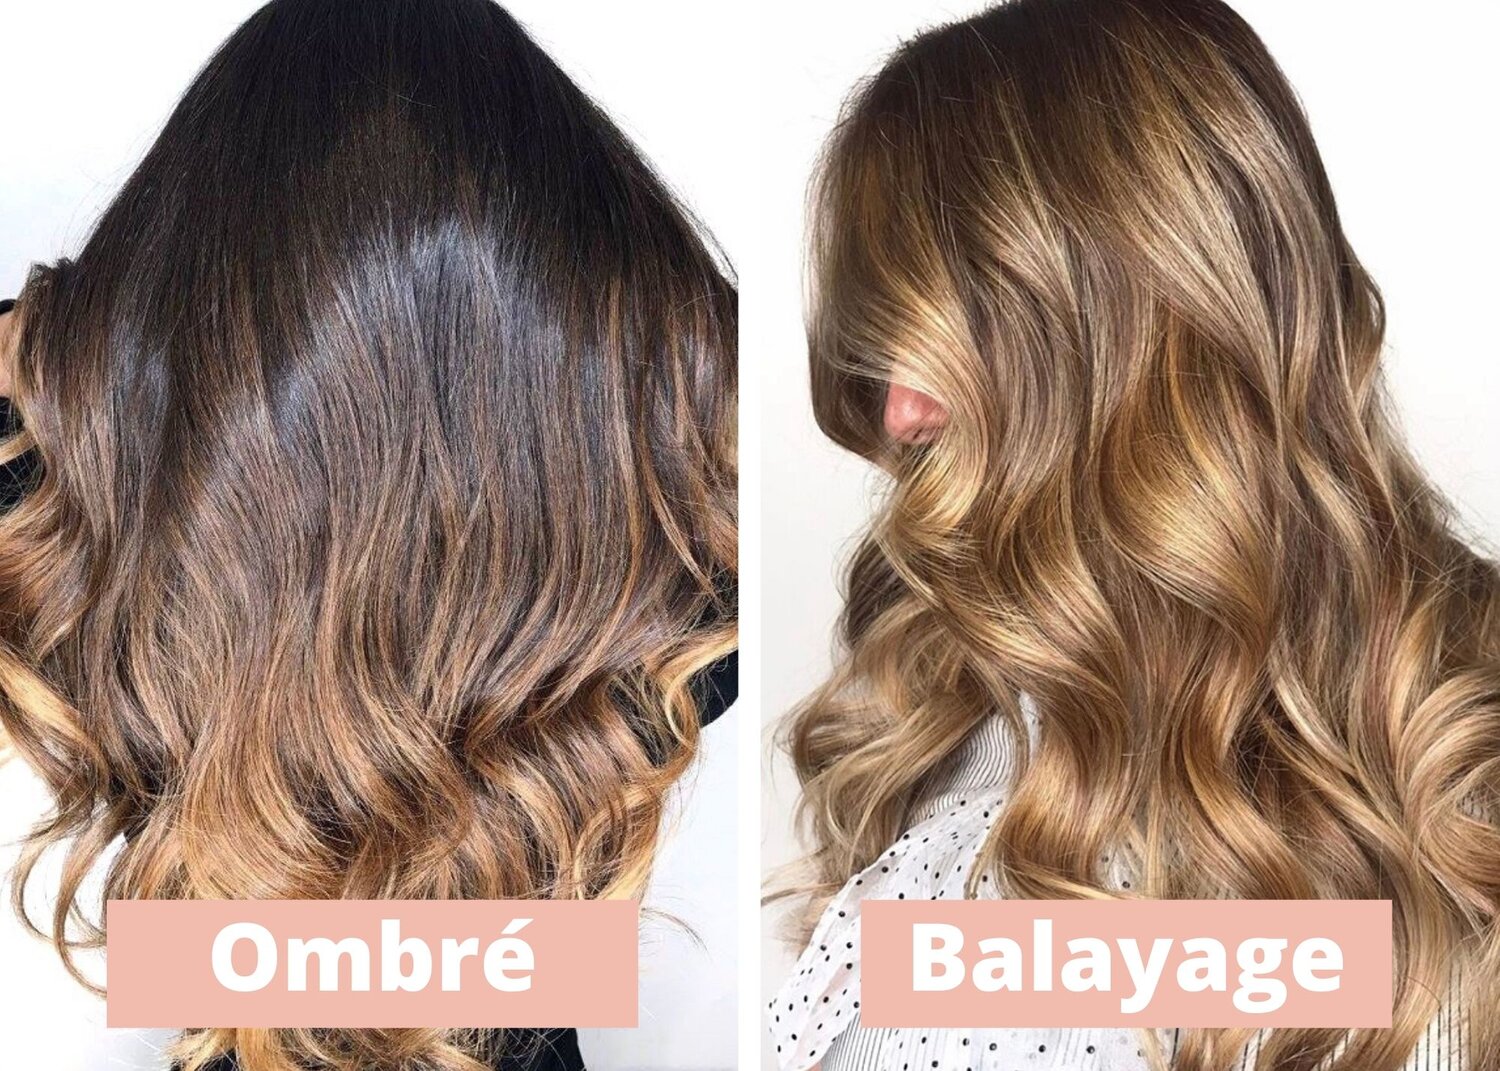 9. "Blonde Ombre vs Balayage: What's the Difference?" - wide 8